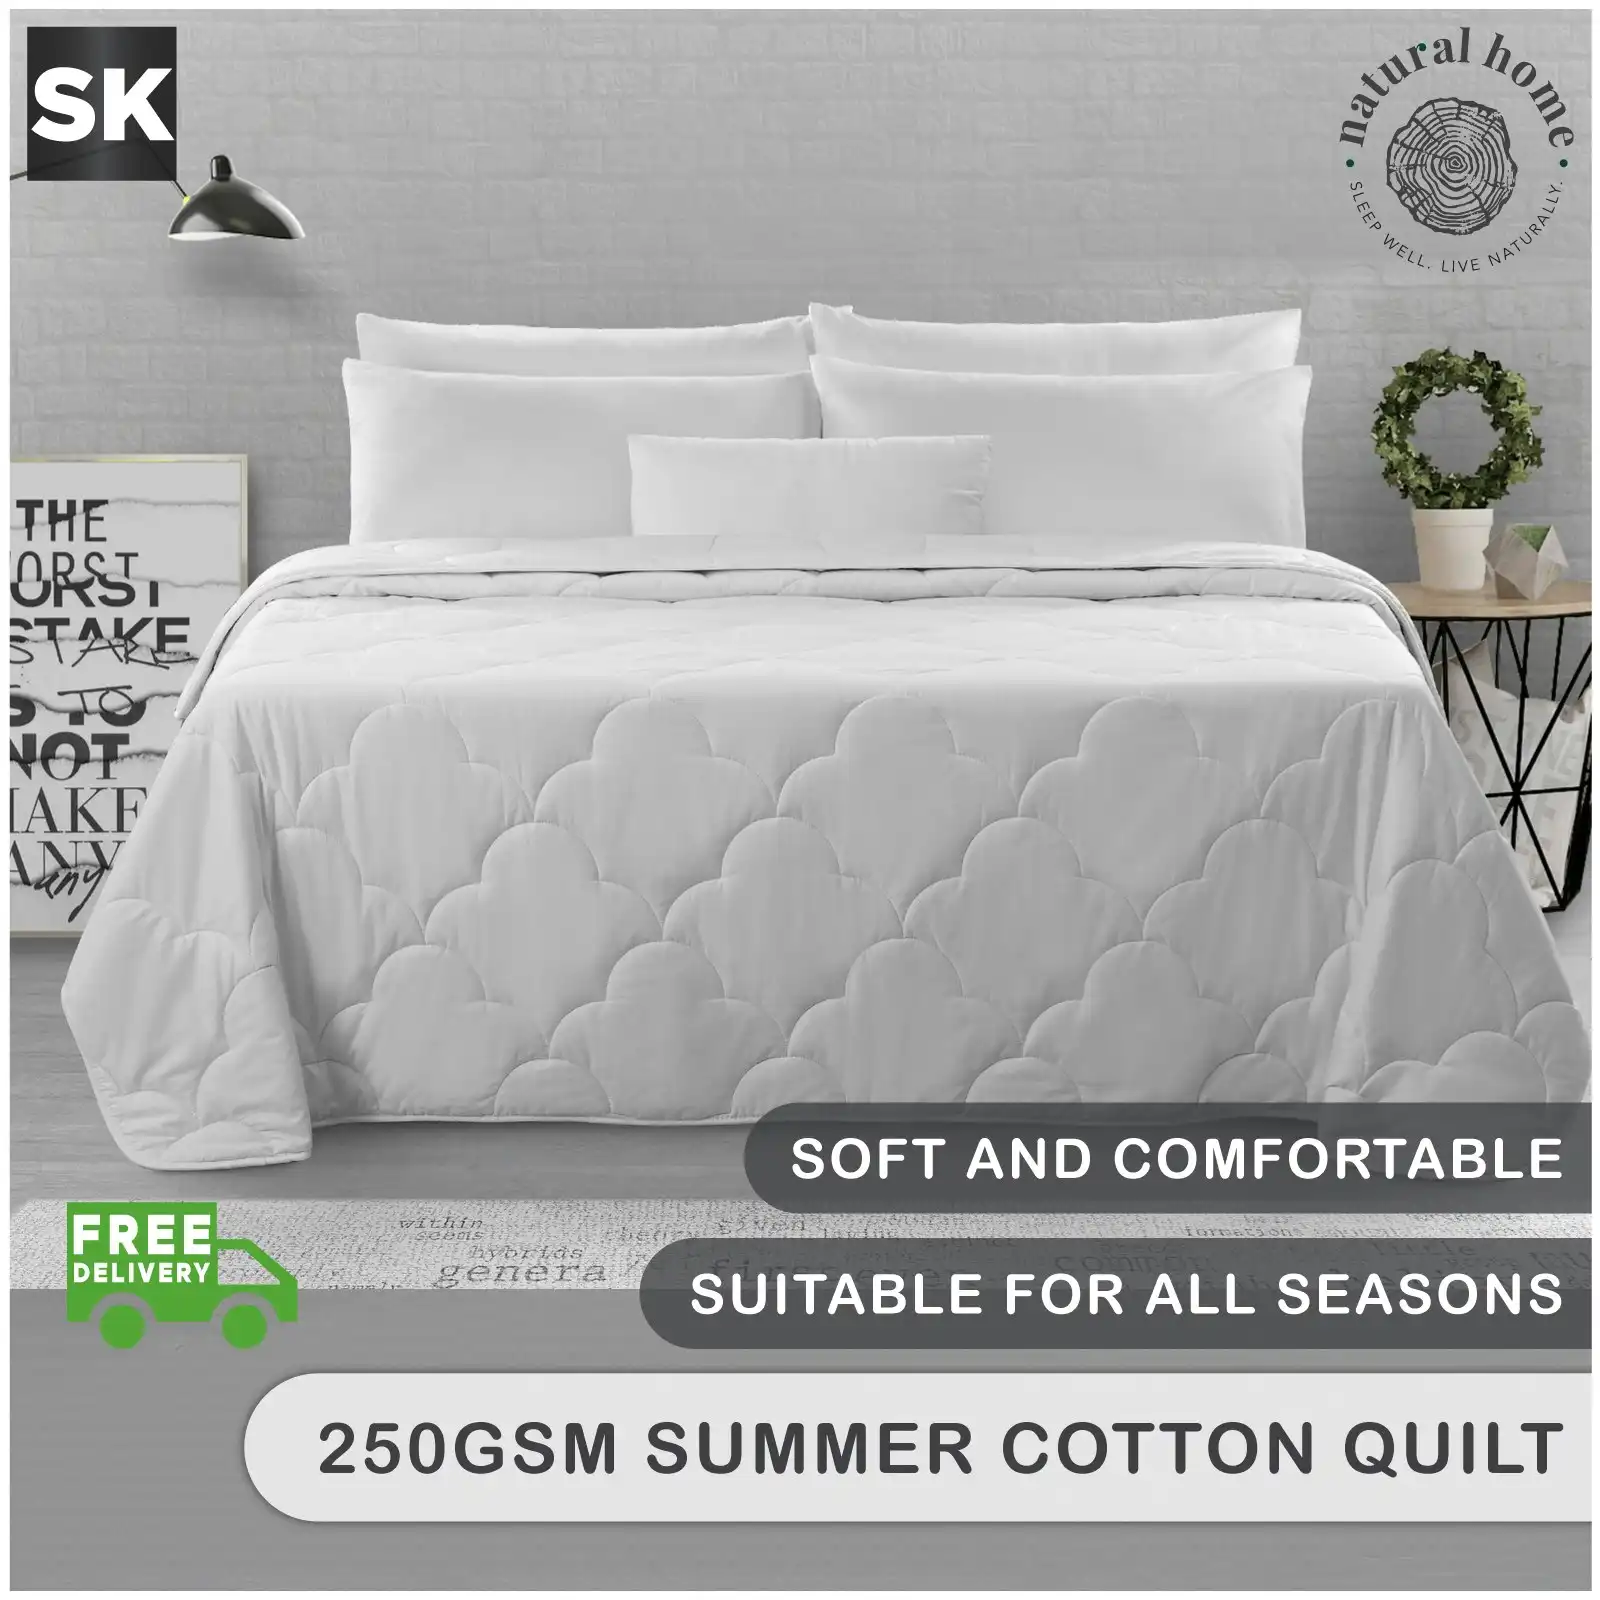 Natural Home Summer Cotton Quilt 250gsm White Super King Bed